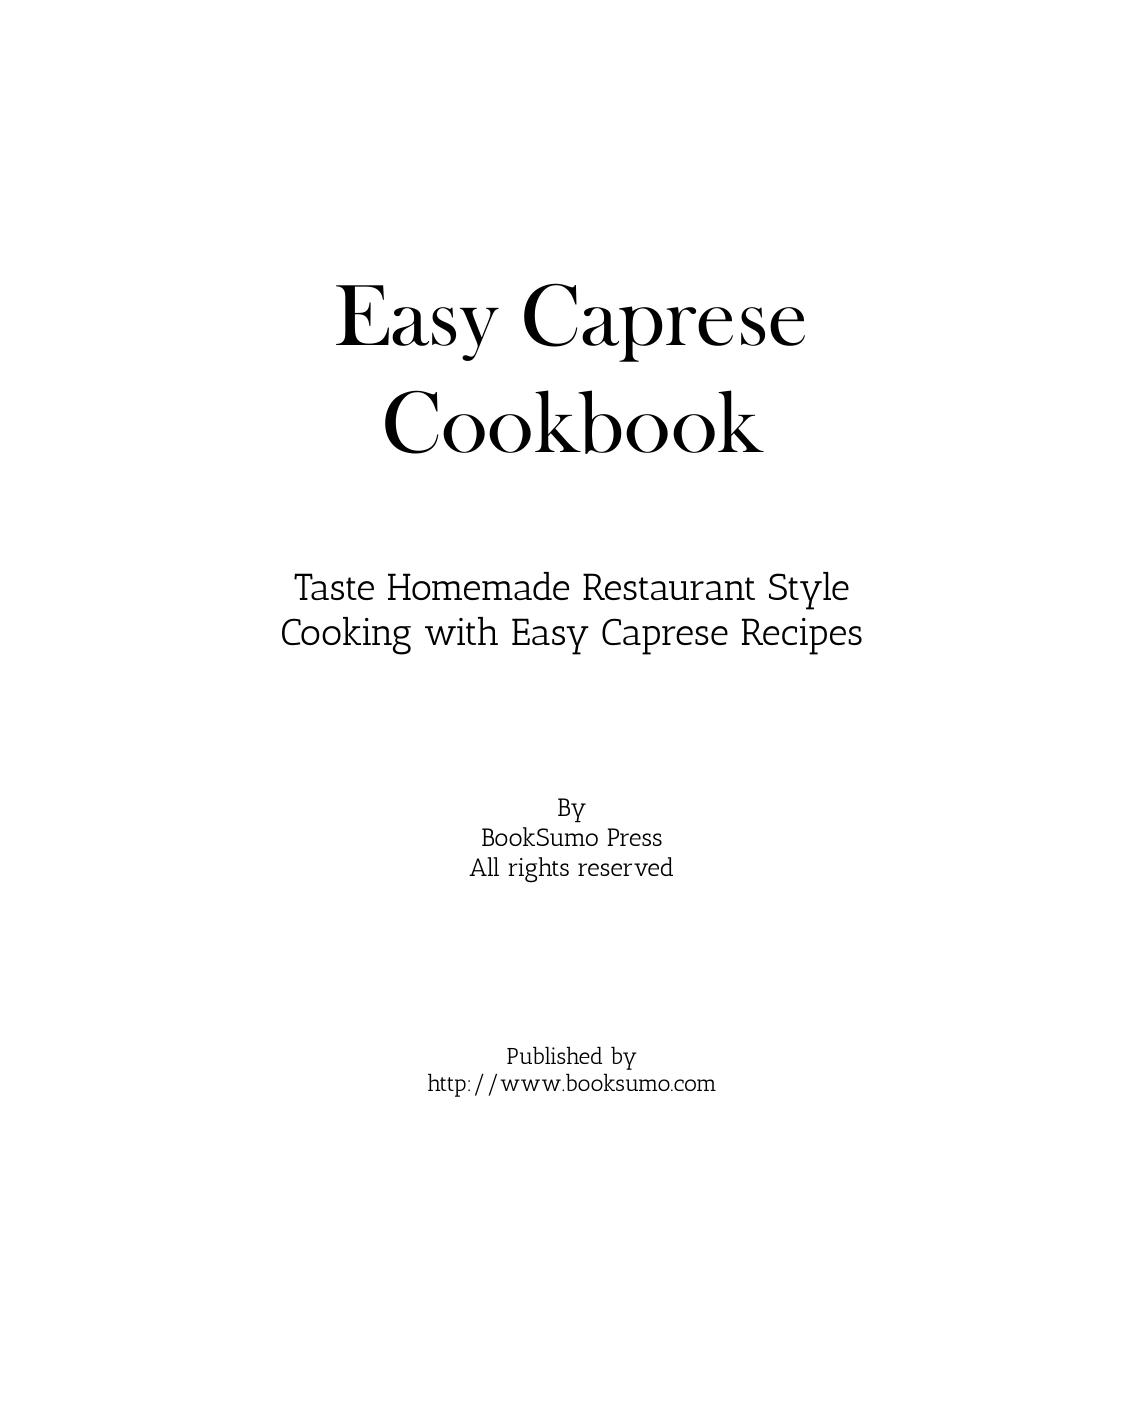 Easy Caprese Cookbook: Taste Homemade Restaurant Style Cooking with Easy Caprese Recipes by BookSumo Press